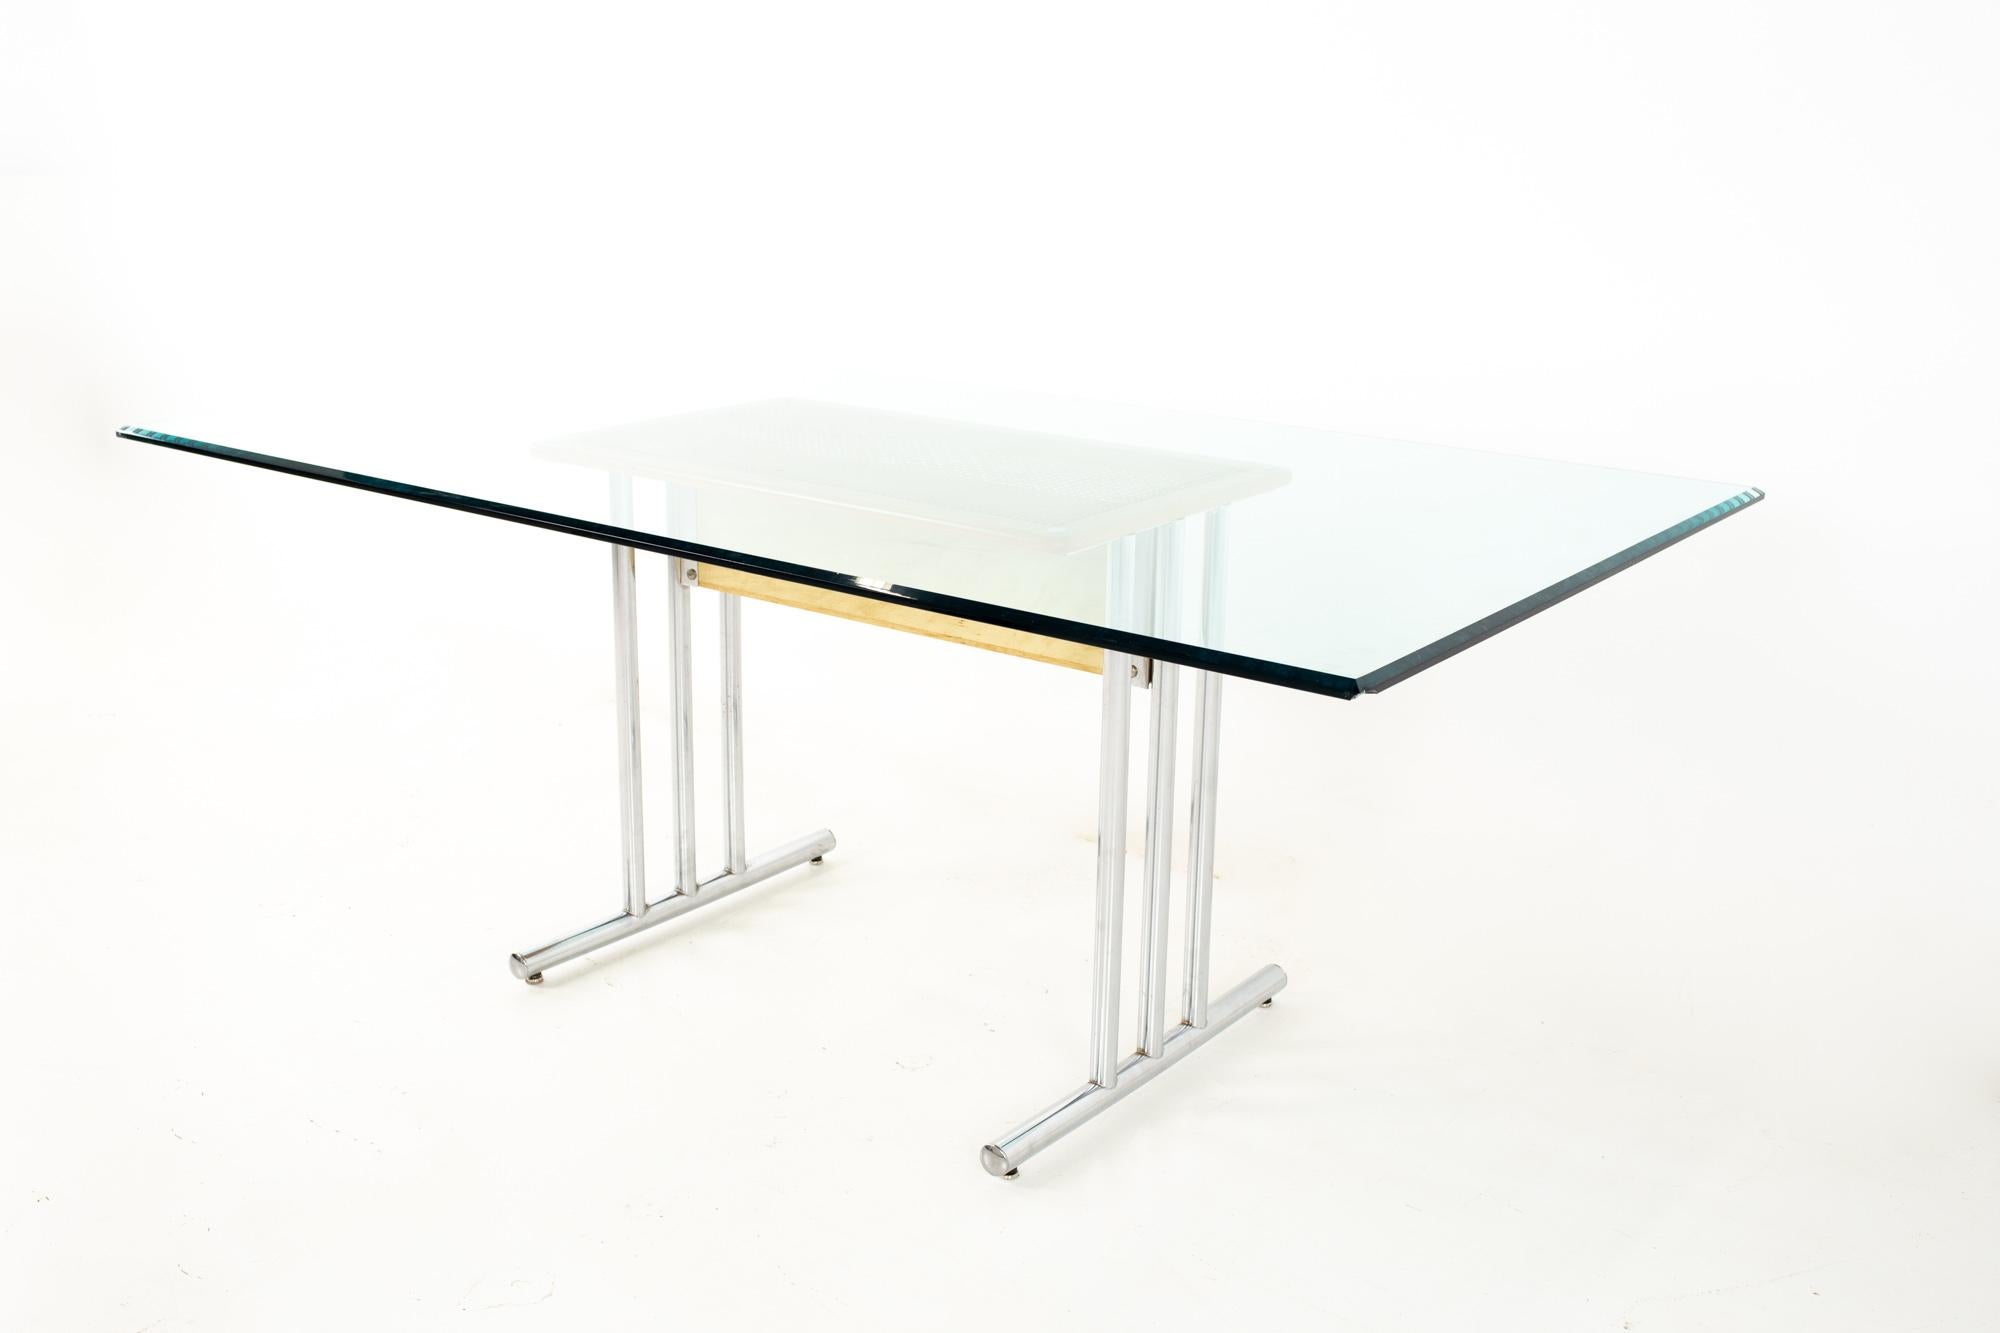 Harvey Probber style mid century glass and chrome and cane dining table
Table measures: 72 wide x 40.25 deep x 29.25 inches high

All pieces of furniture can be had in what we call restored vintage condition. That means the piece is restored upon